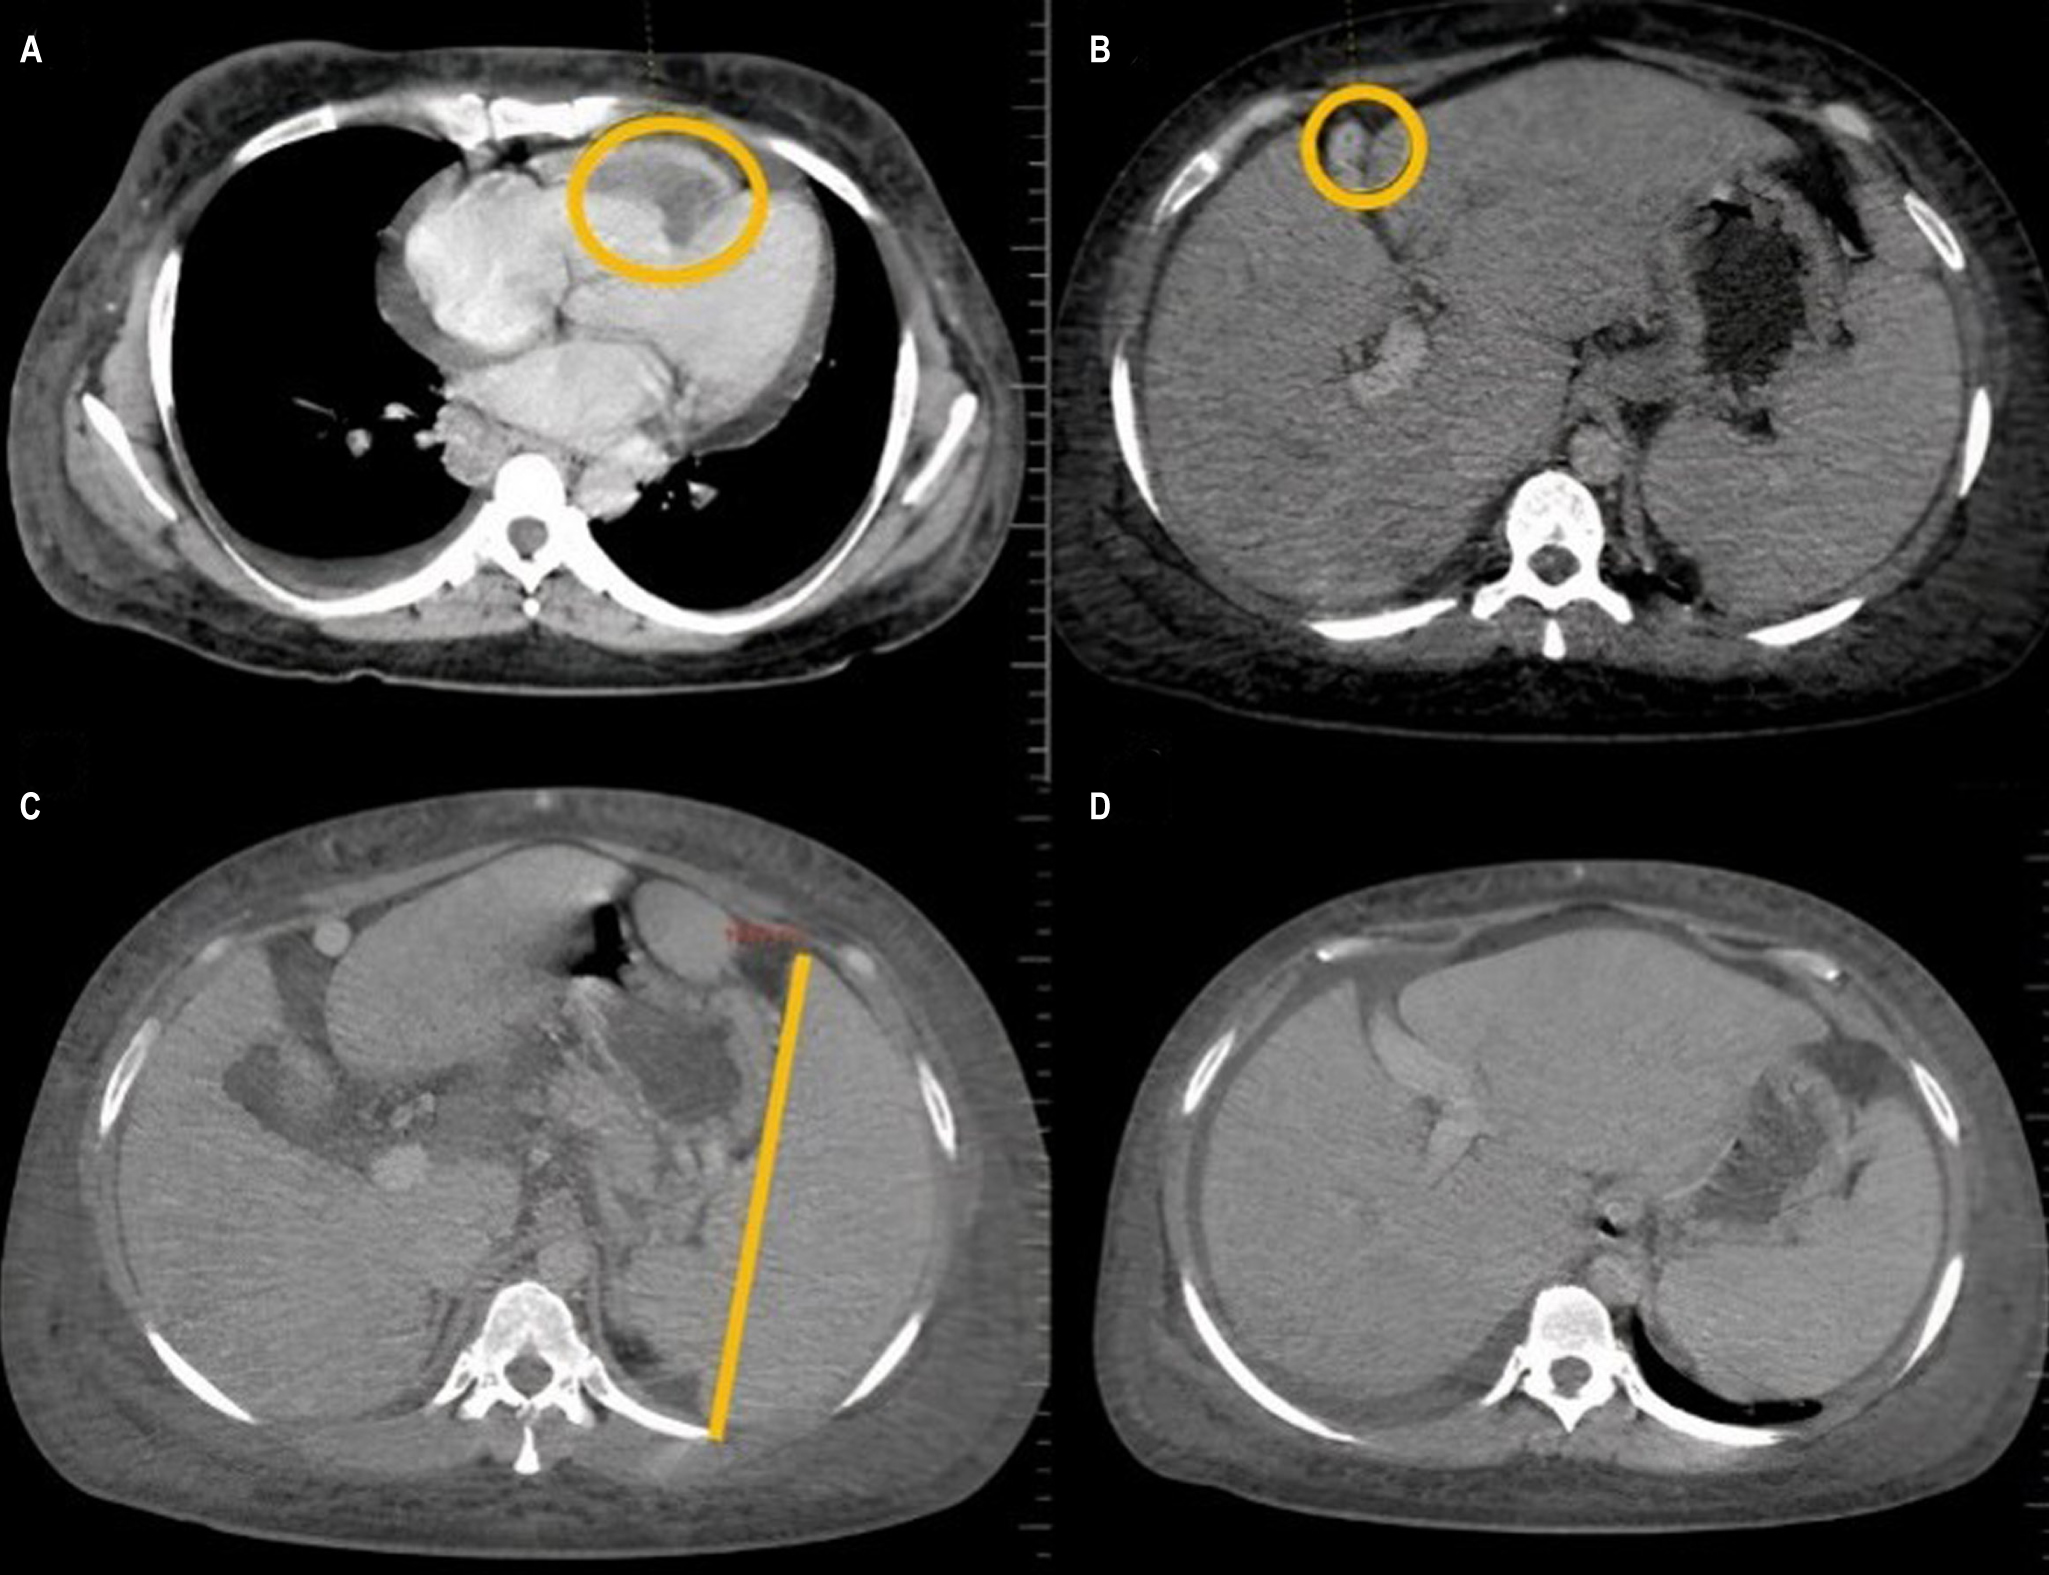 Figure 1. Contrasted CT revealing: A. Right atrial thrombosis; B. BCS detected by the absence of blood flow at the level of the outflow tract of the middle suprahepatic vein, hepatomegaly; C and D. Splenomegaly, ascites, and collateral circulation. Courtesy of the radiology department, Hospital Regional de la Orinoquia (HORO).